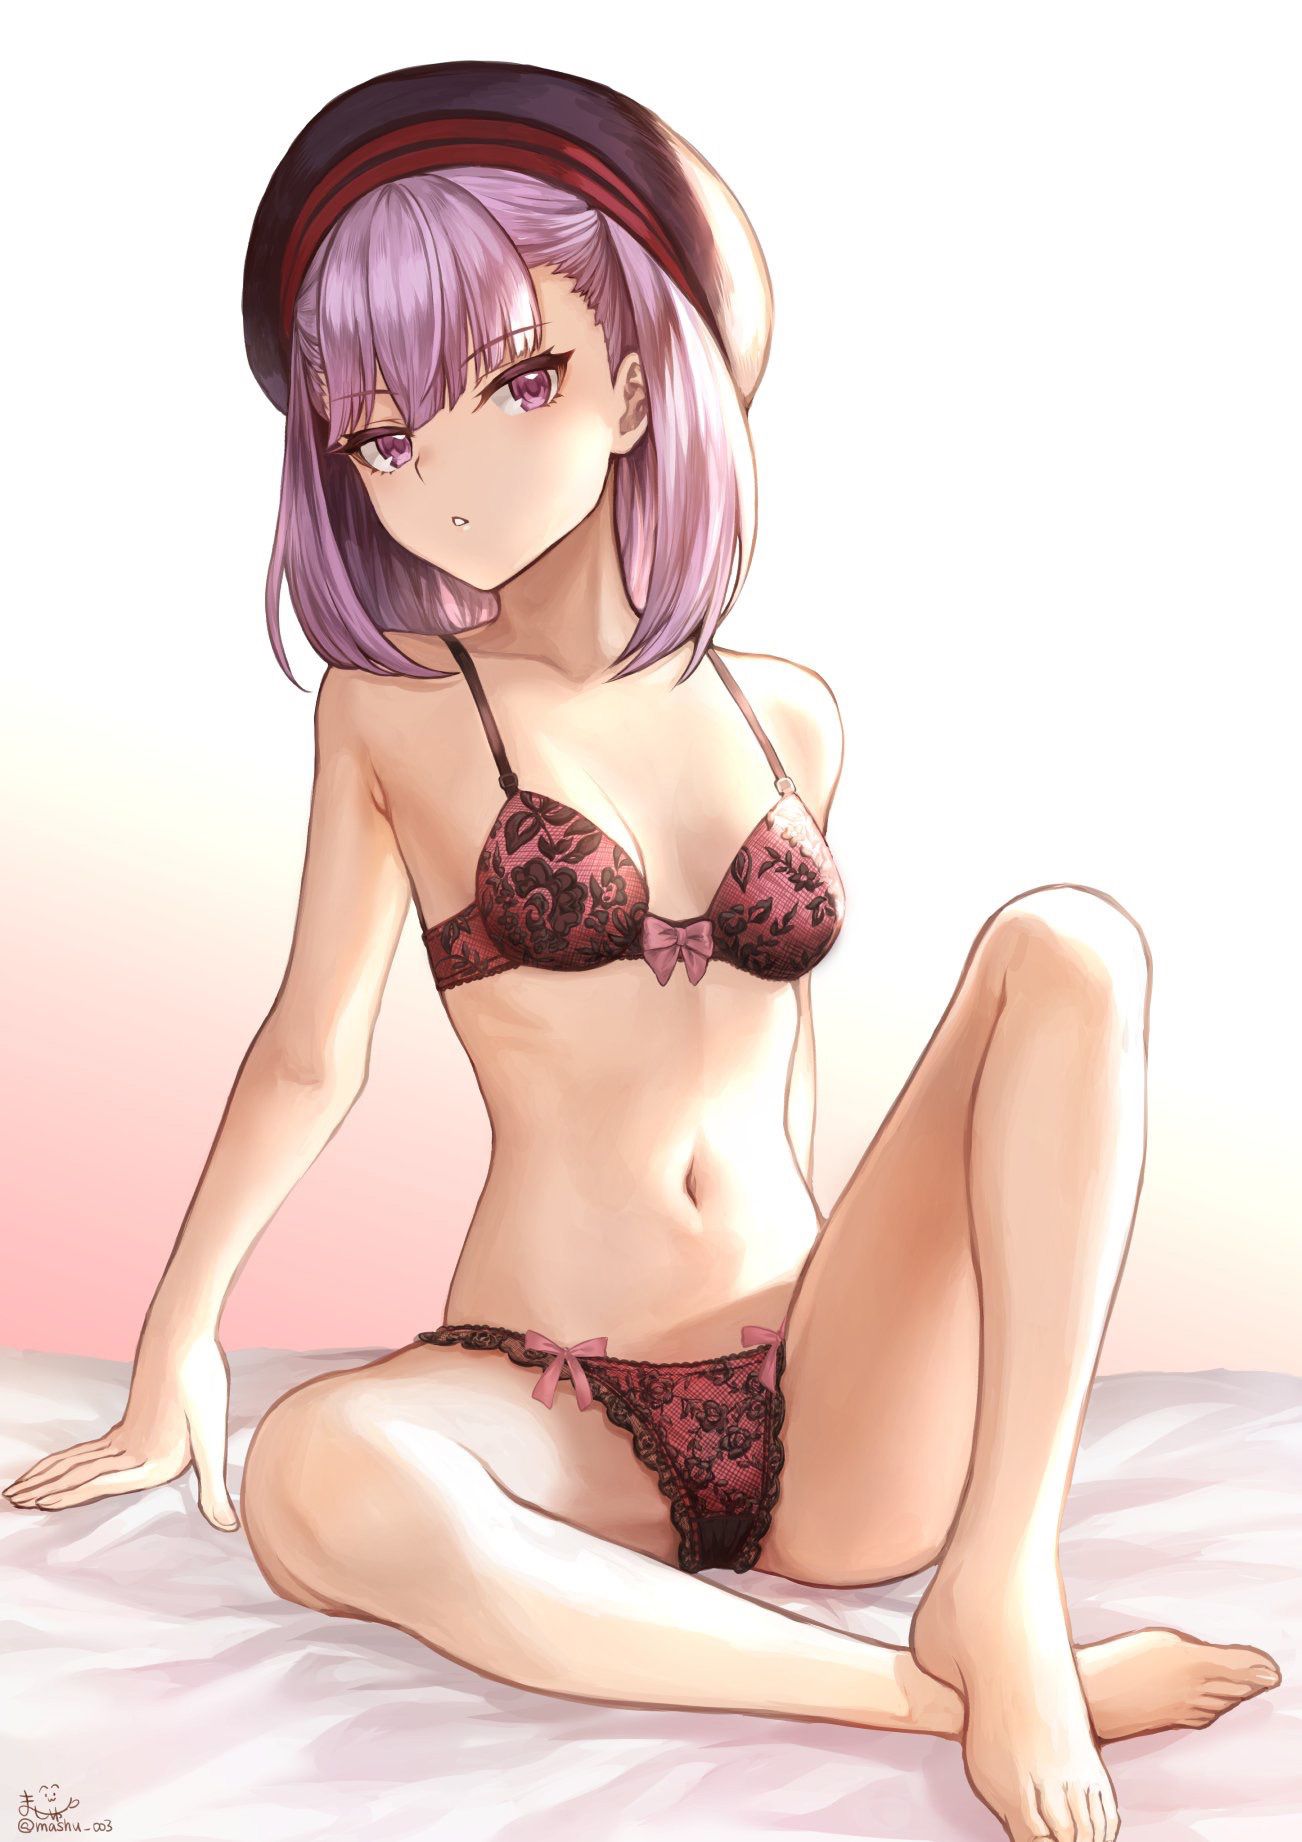 [Fate/GrandOrder (FGO)] secondary erotic images of female characters 3 60 photos 41